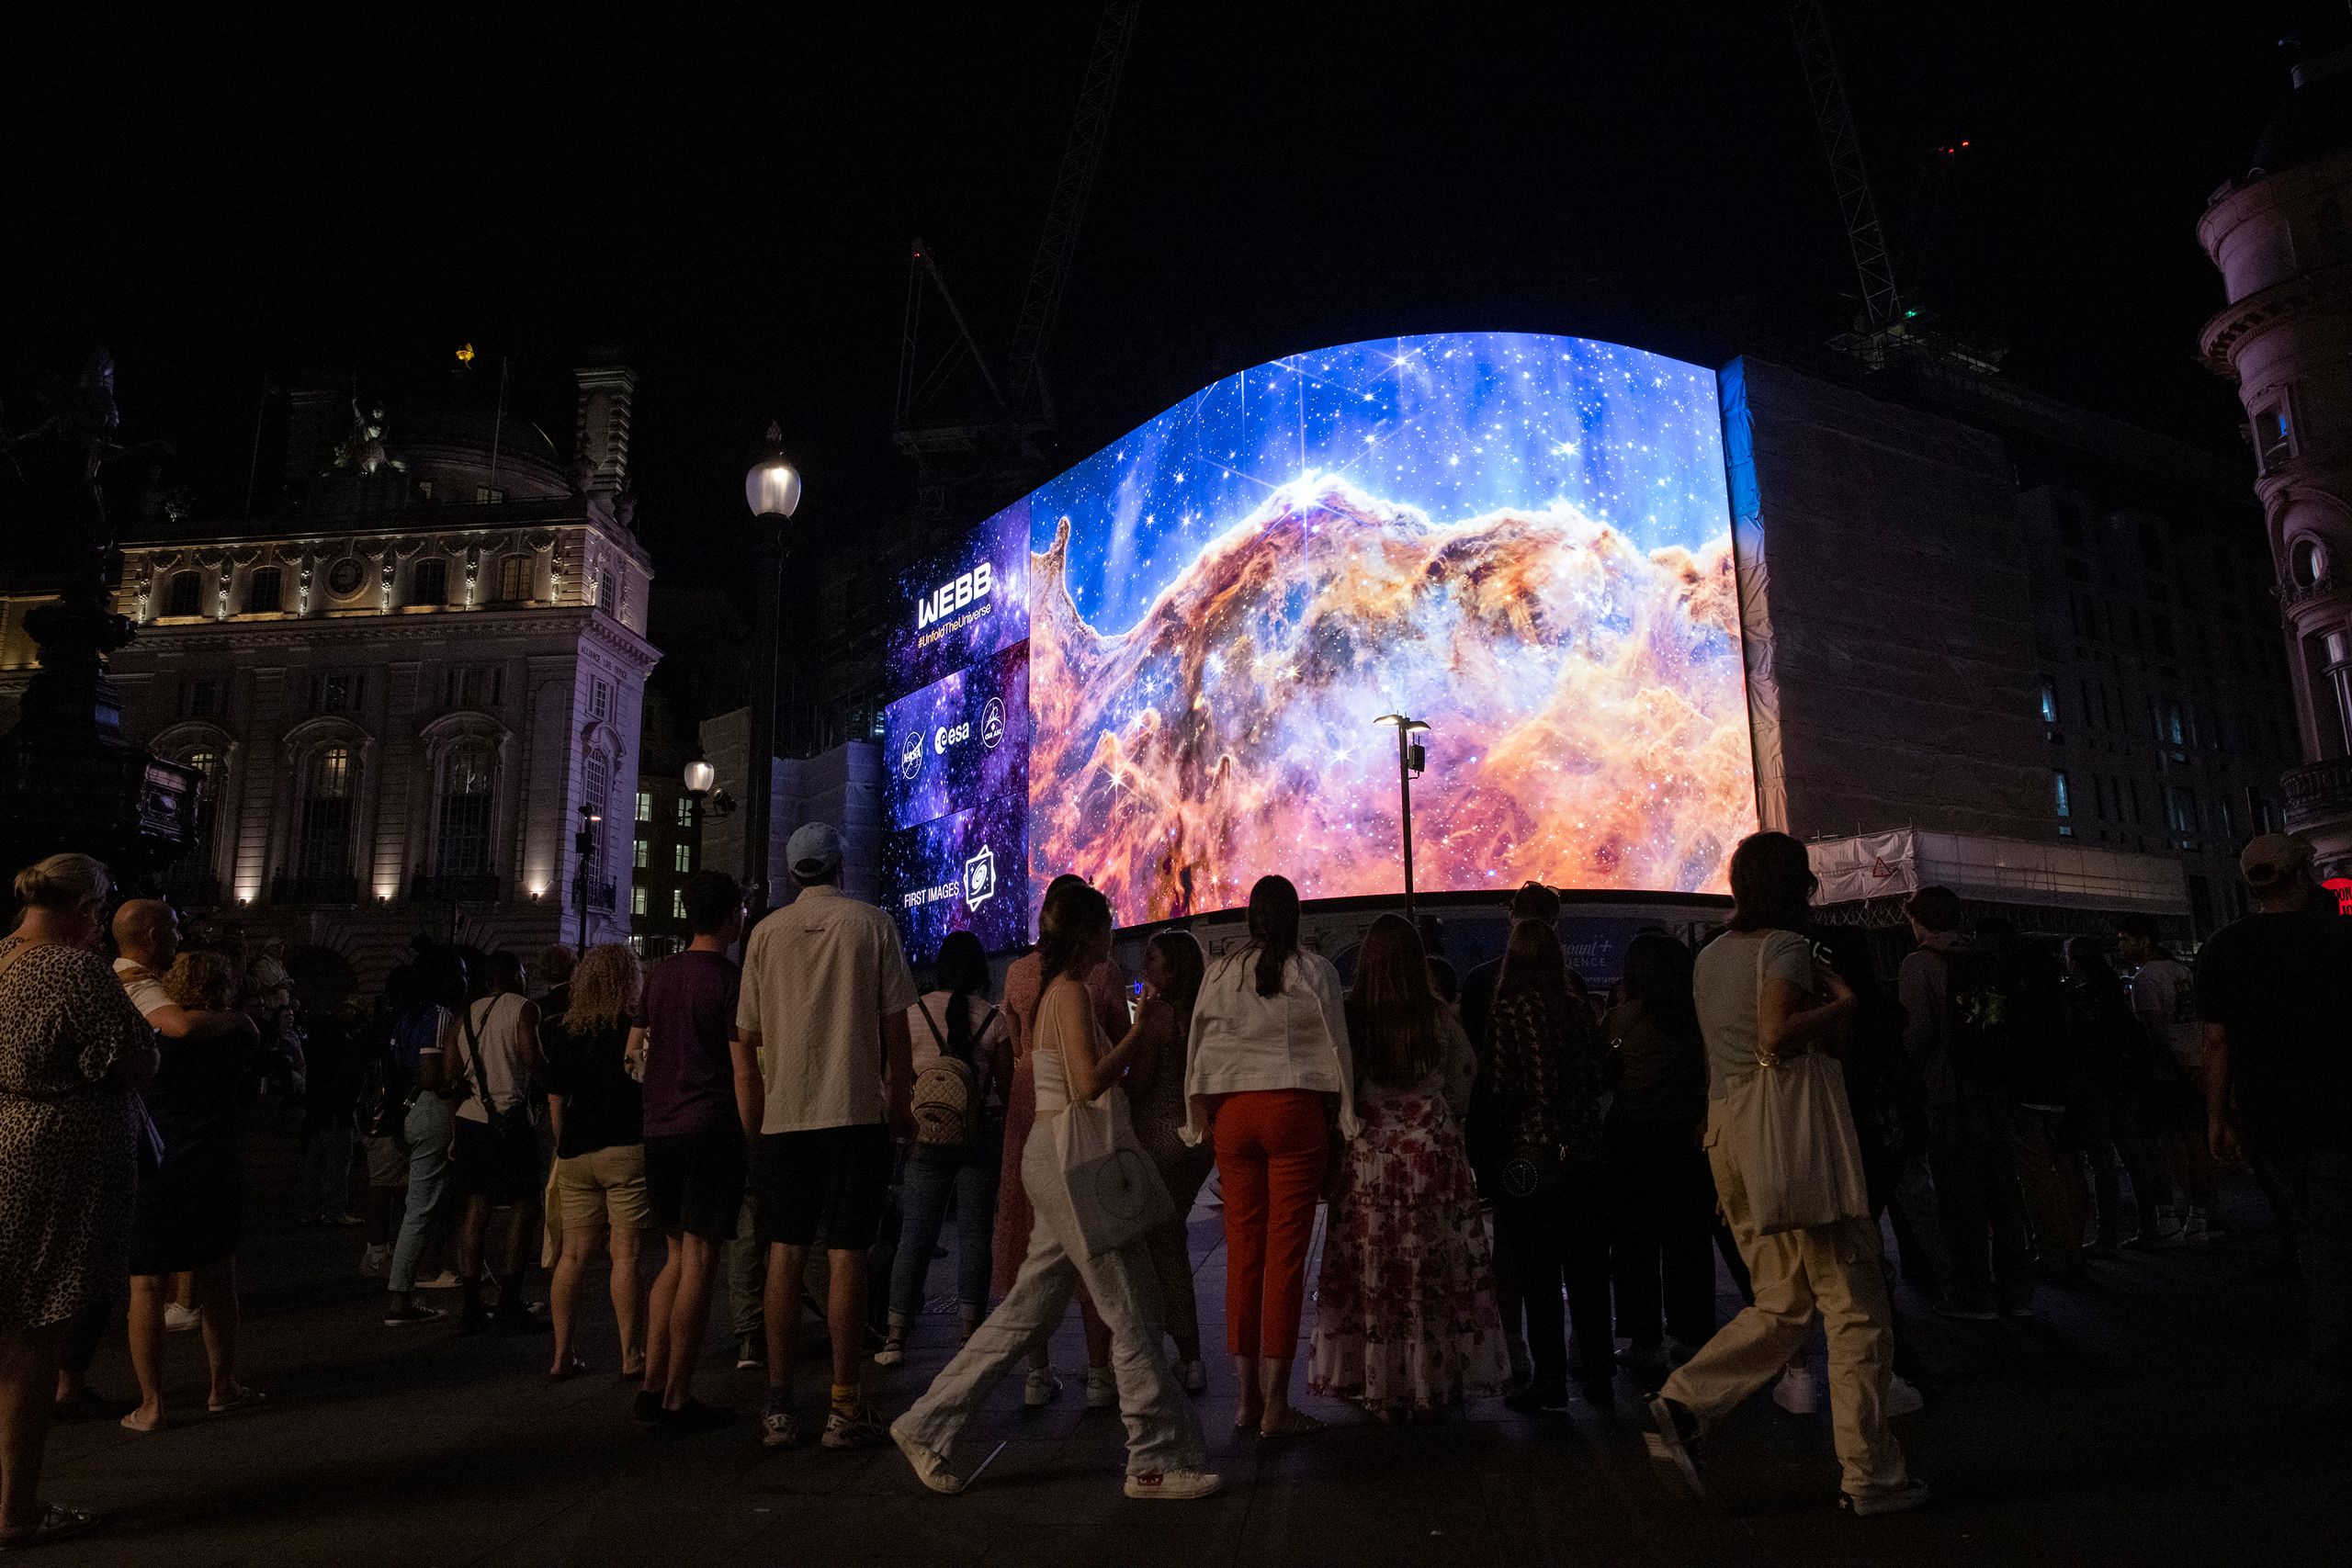 A general view of the broadcast of NASA's first images from James Webb Space Telescope to screens in Picadilly Circus